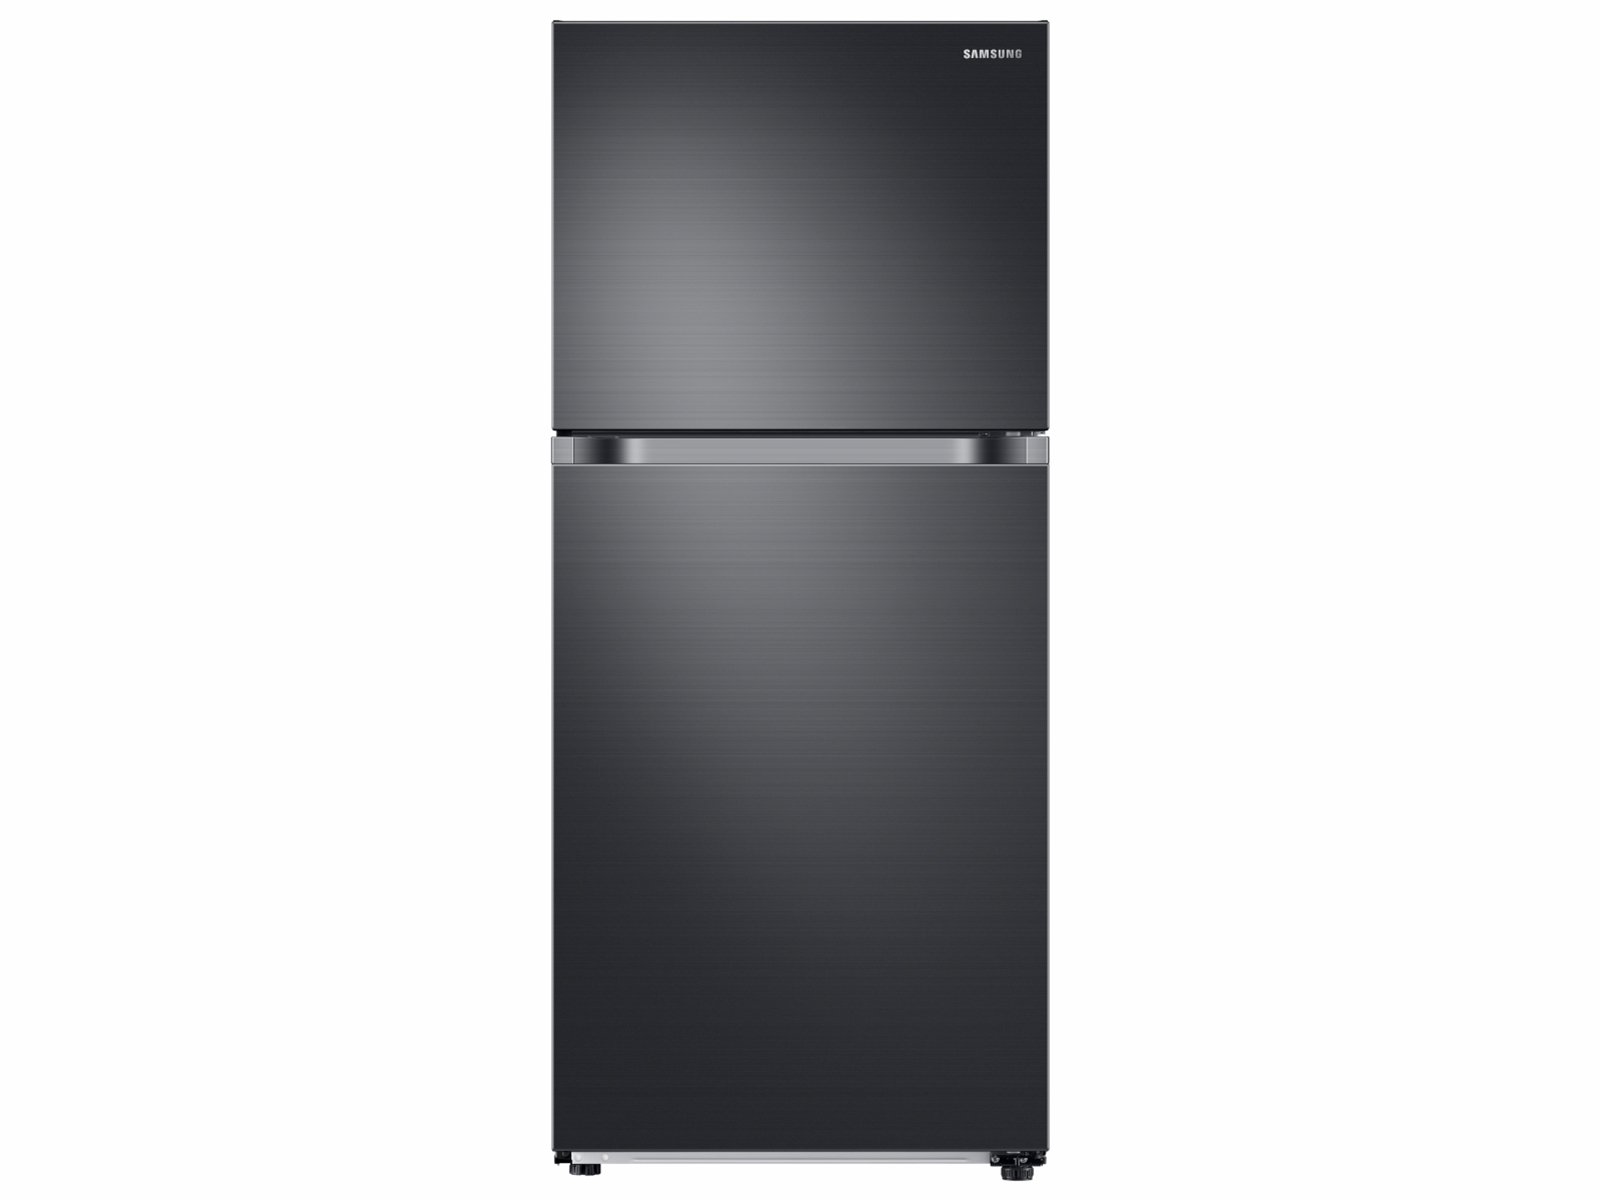 Samsung 18 cu. ft. Top Freezer Refrigerator with FlexZone™ in Black Stainless Steel(RT18M6213SG/AA)